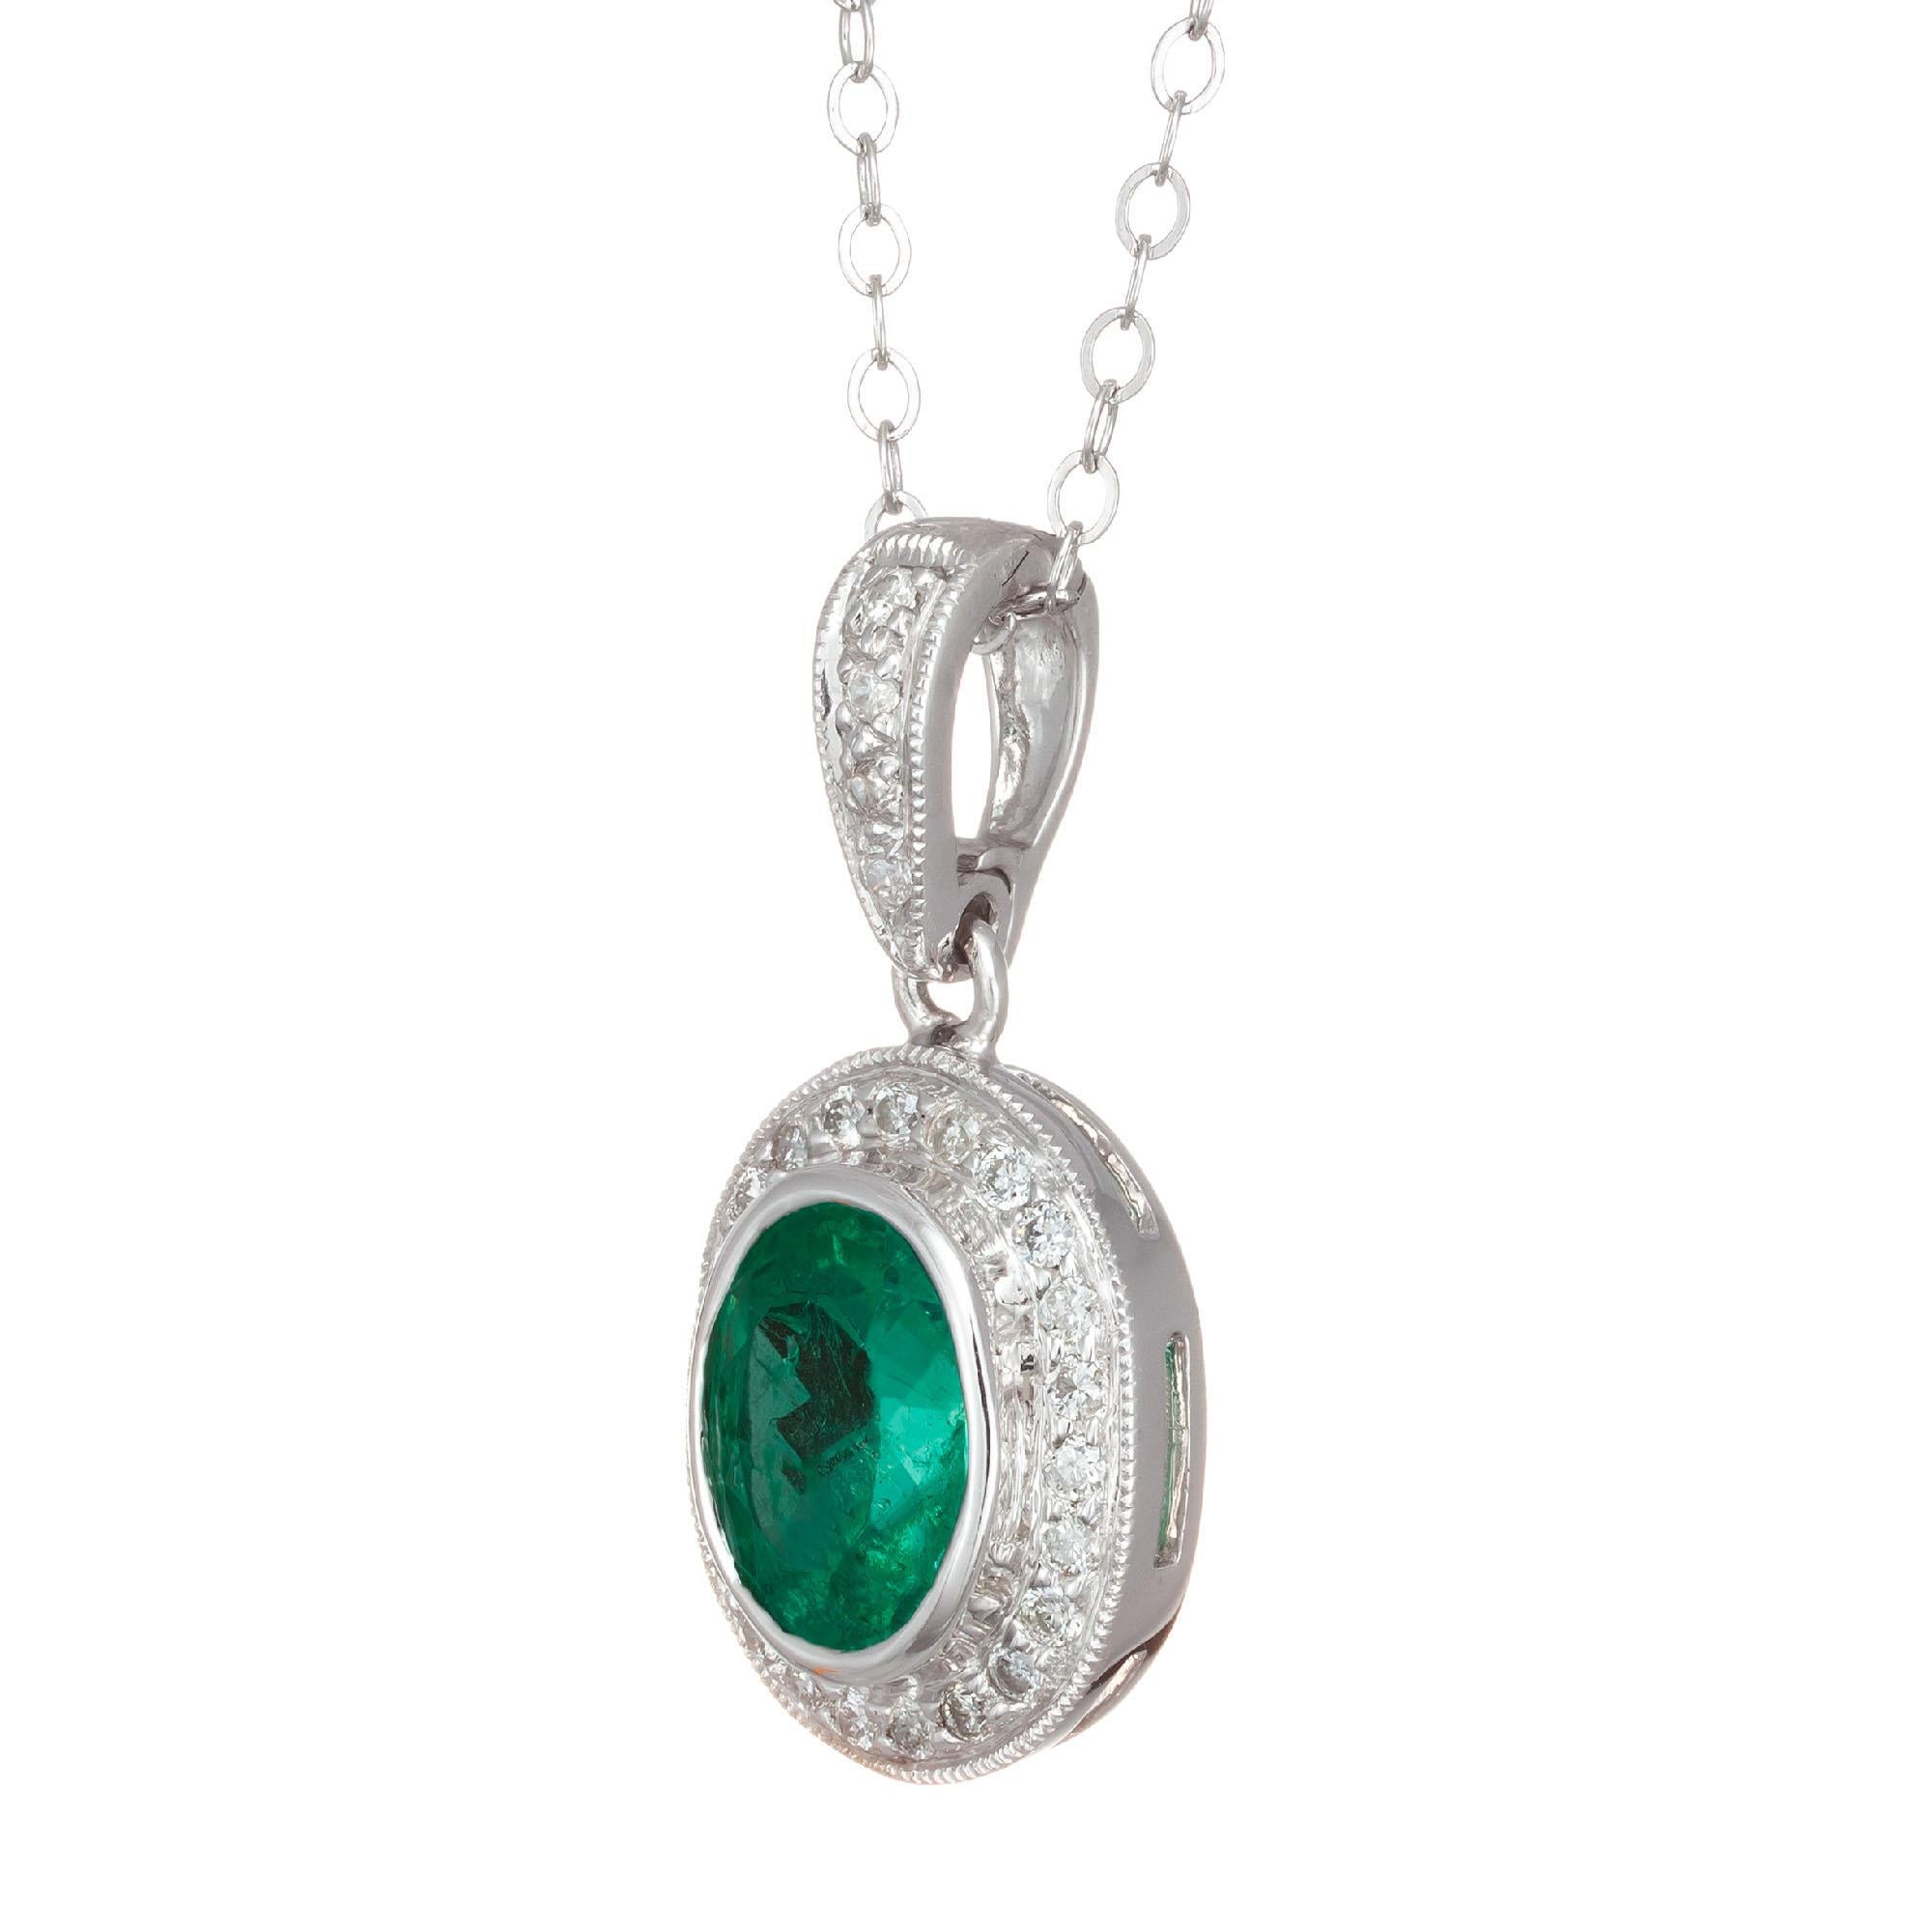 Oval Emerald and diamond halo pendant. 1.14 carat oval emerald with round accent diamonds in 14k white gold.  diamonds.

Emerald oval 8 x 6.5mm, approx. total weight 1.14cts
30 full cut diamonds, approx. total weight .16cts, G, VS
14k White Gold
18